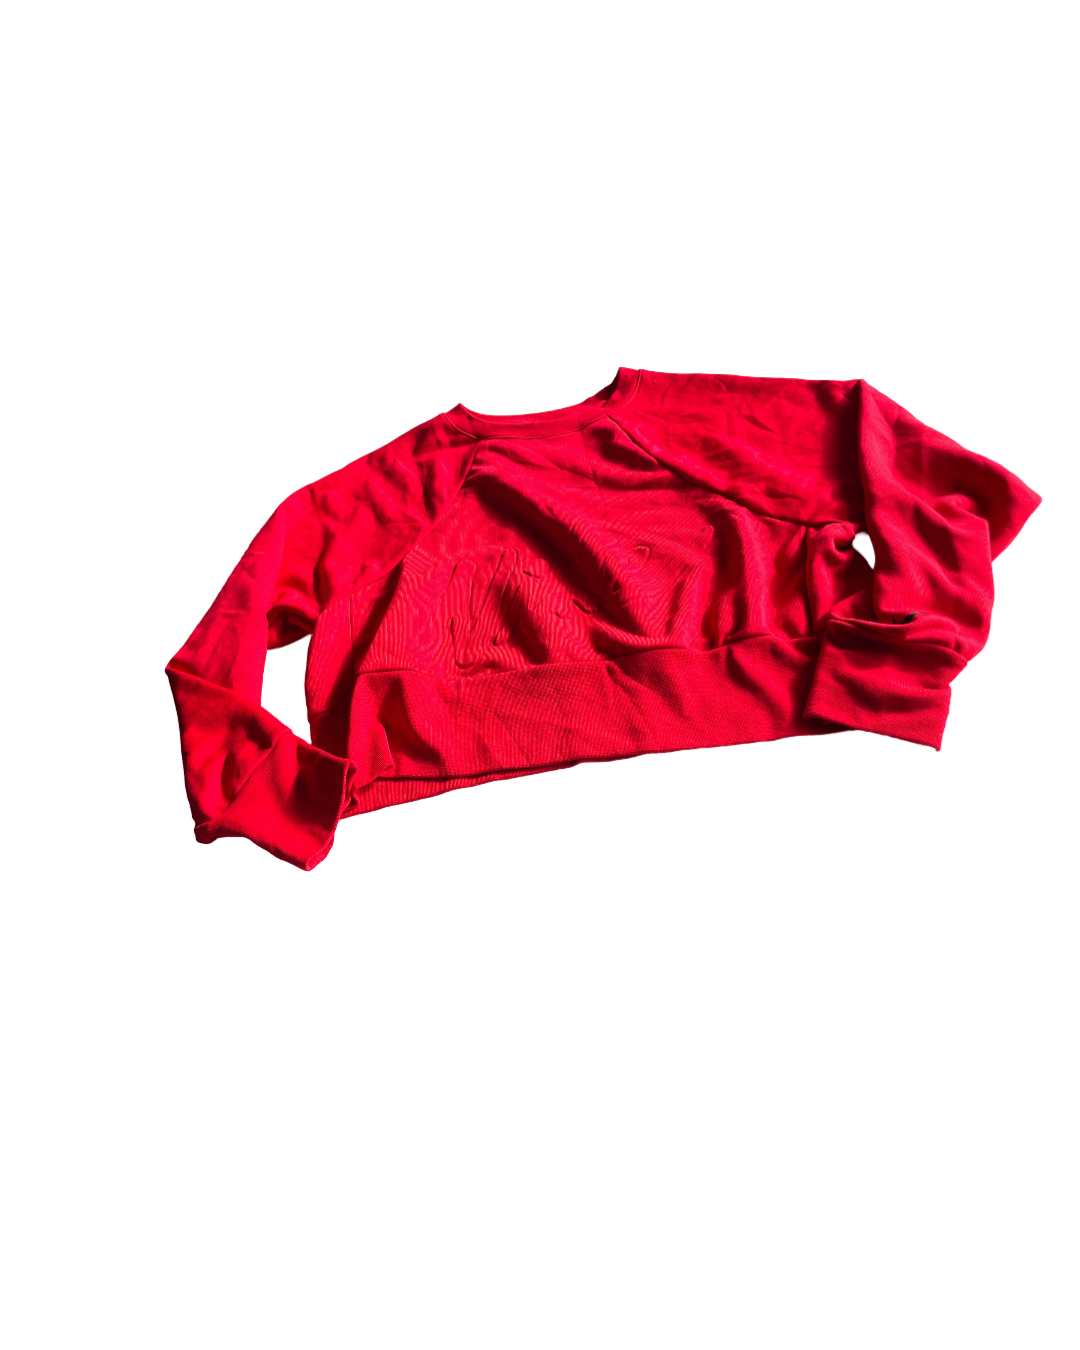 Vintage Nike Cropped Jumper in red. In size small SKU 5076